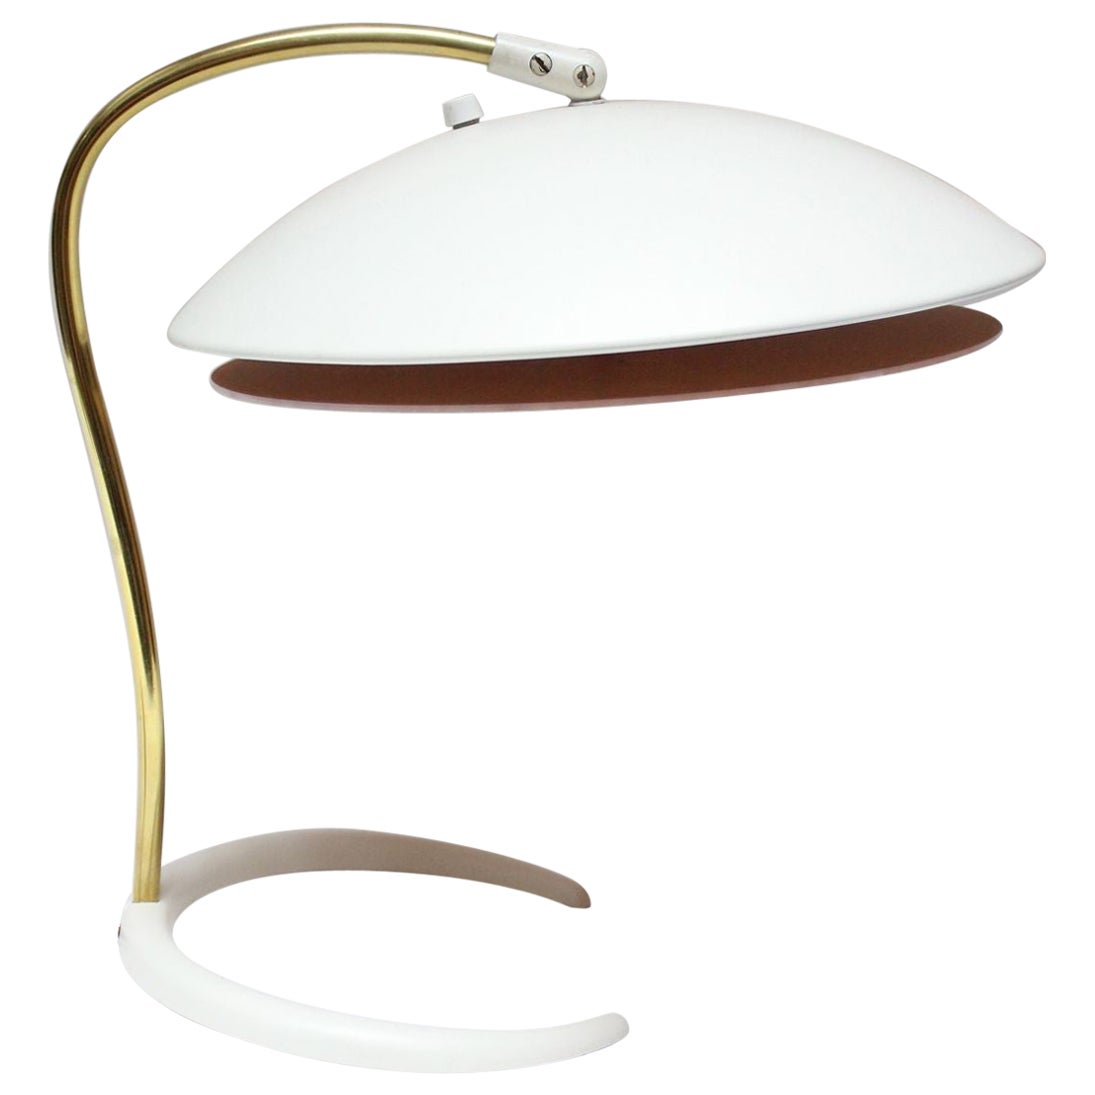 Gerald Thurston for Lightolier Brass and Metal Table Lamp with Crescent Base